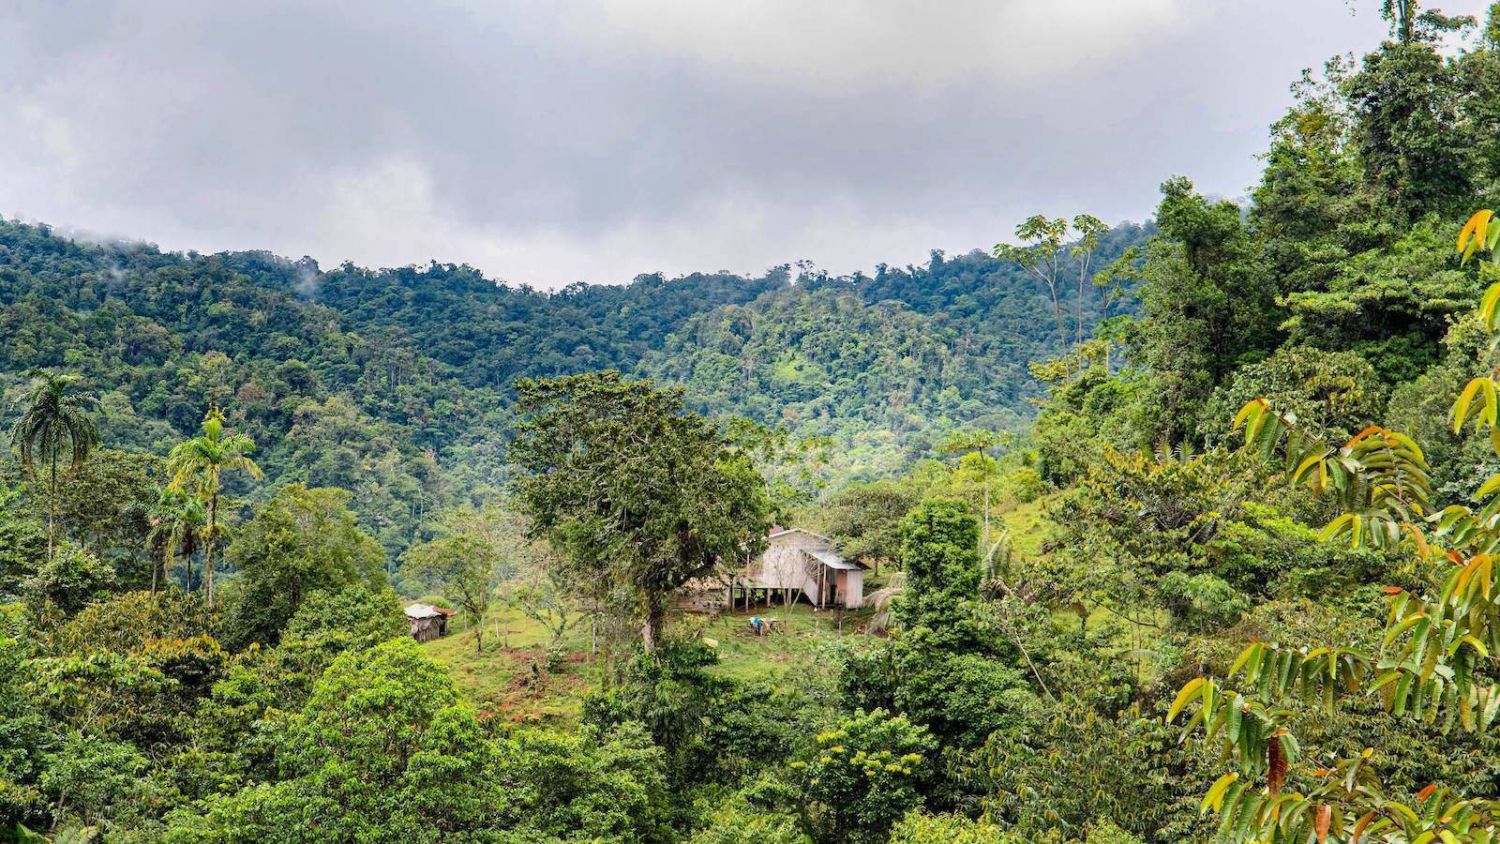 Lauded as Green Model, Costa Rica Faces Unrest in Its Forests - Yale E360